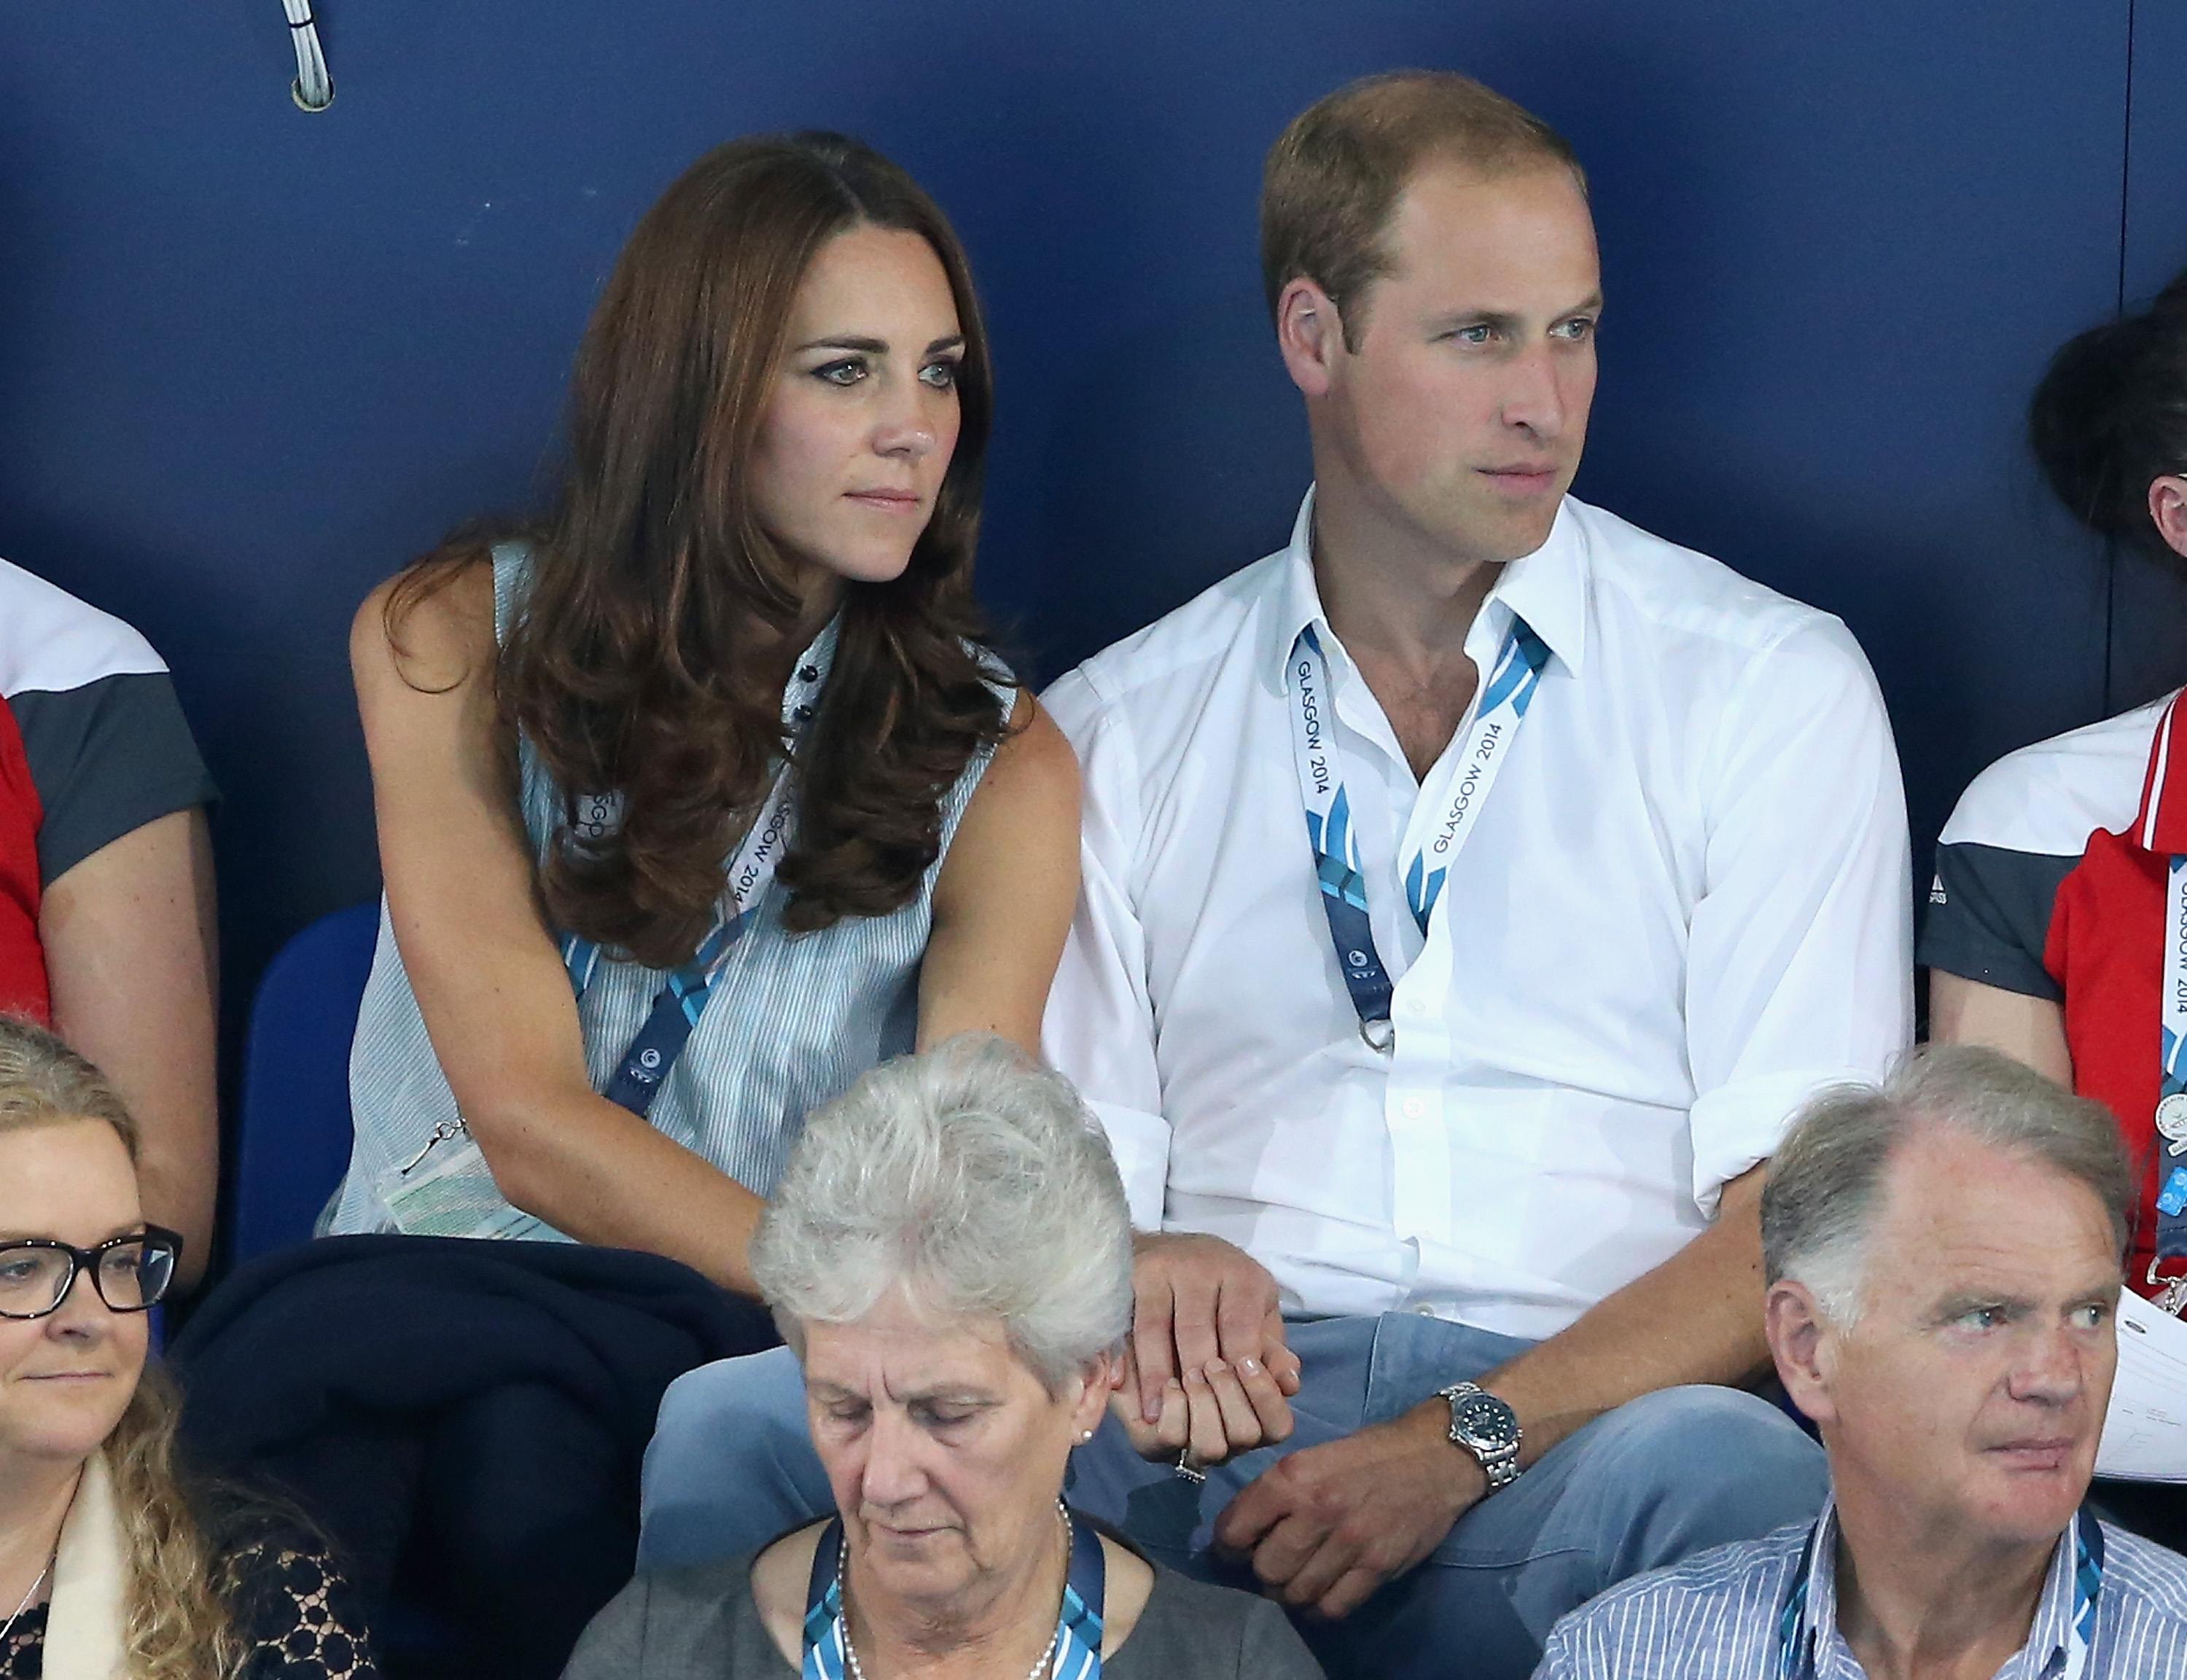 Catherine, Duchess of Cambridge and Prince William, Duke of Cambridge hold hands as they watch the swimming at Tollcross Swimming Centre during the 20th Commonwealth games on July 28, 2014 in Glasgow, Scotland. 